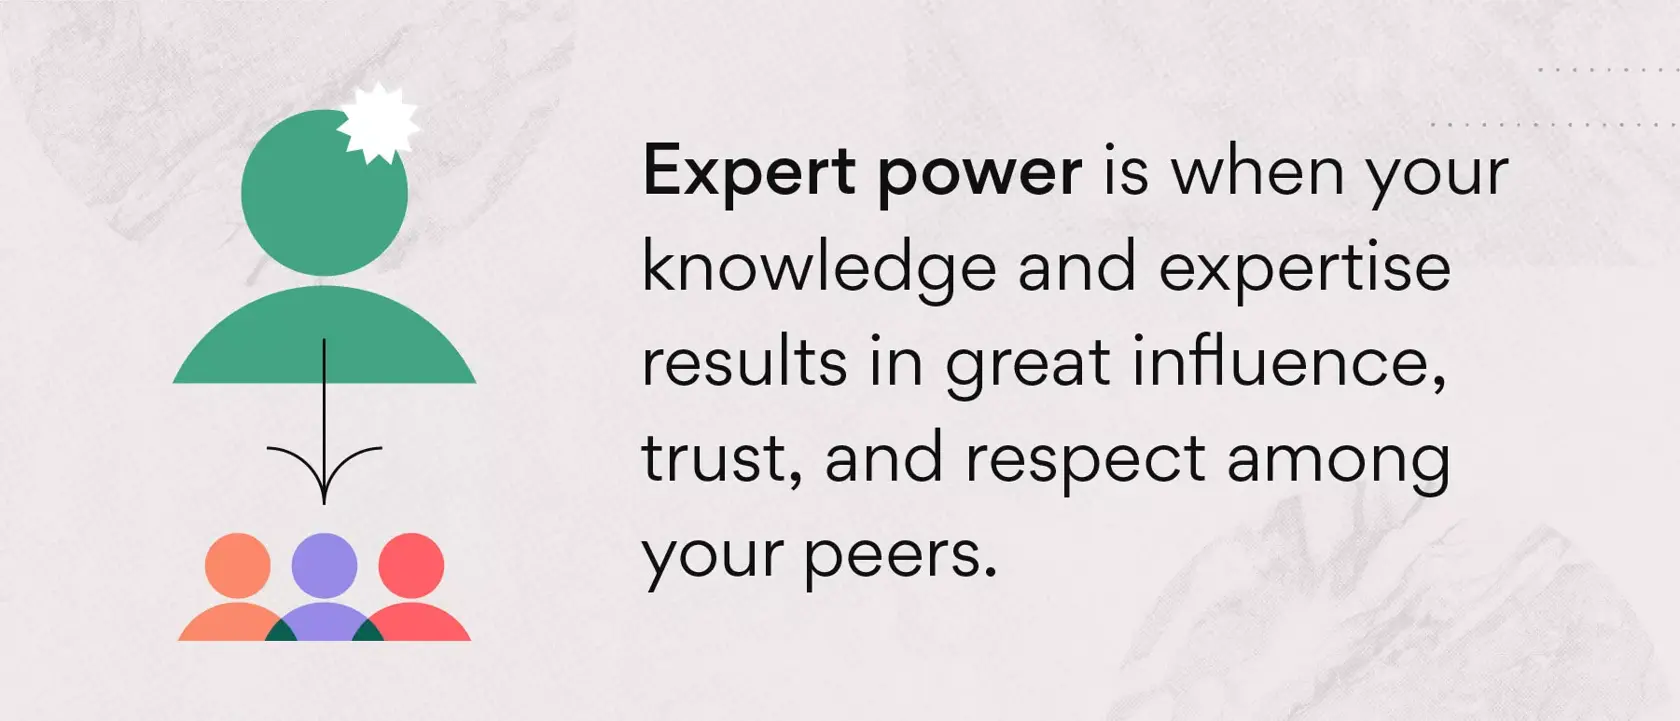 What is expert power?